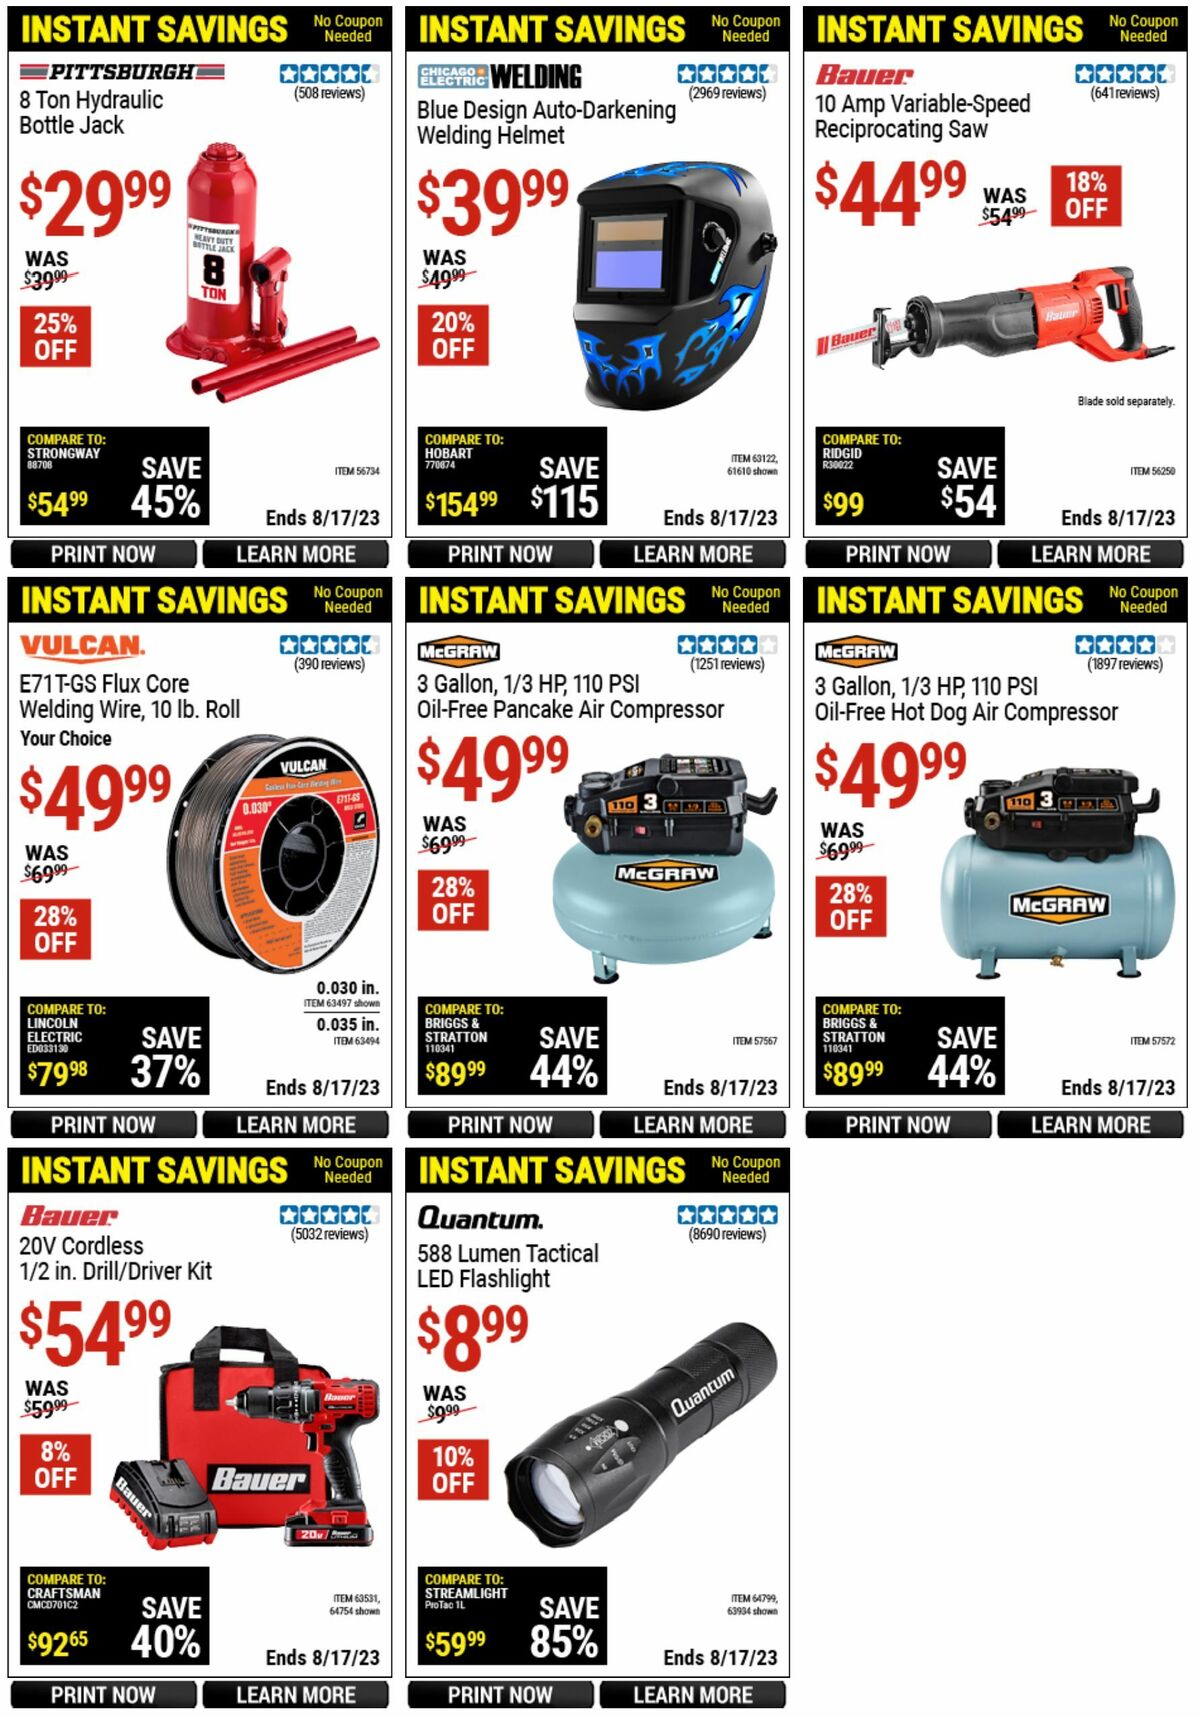 Harbor Freight Tools Instant Savings Weekly Ad from July 14